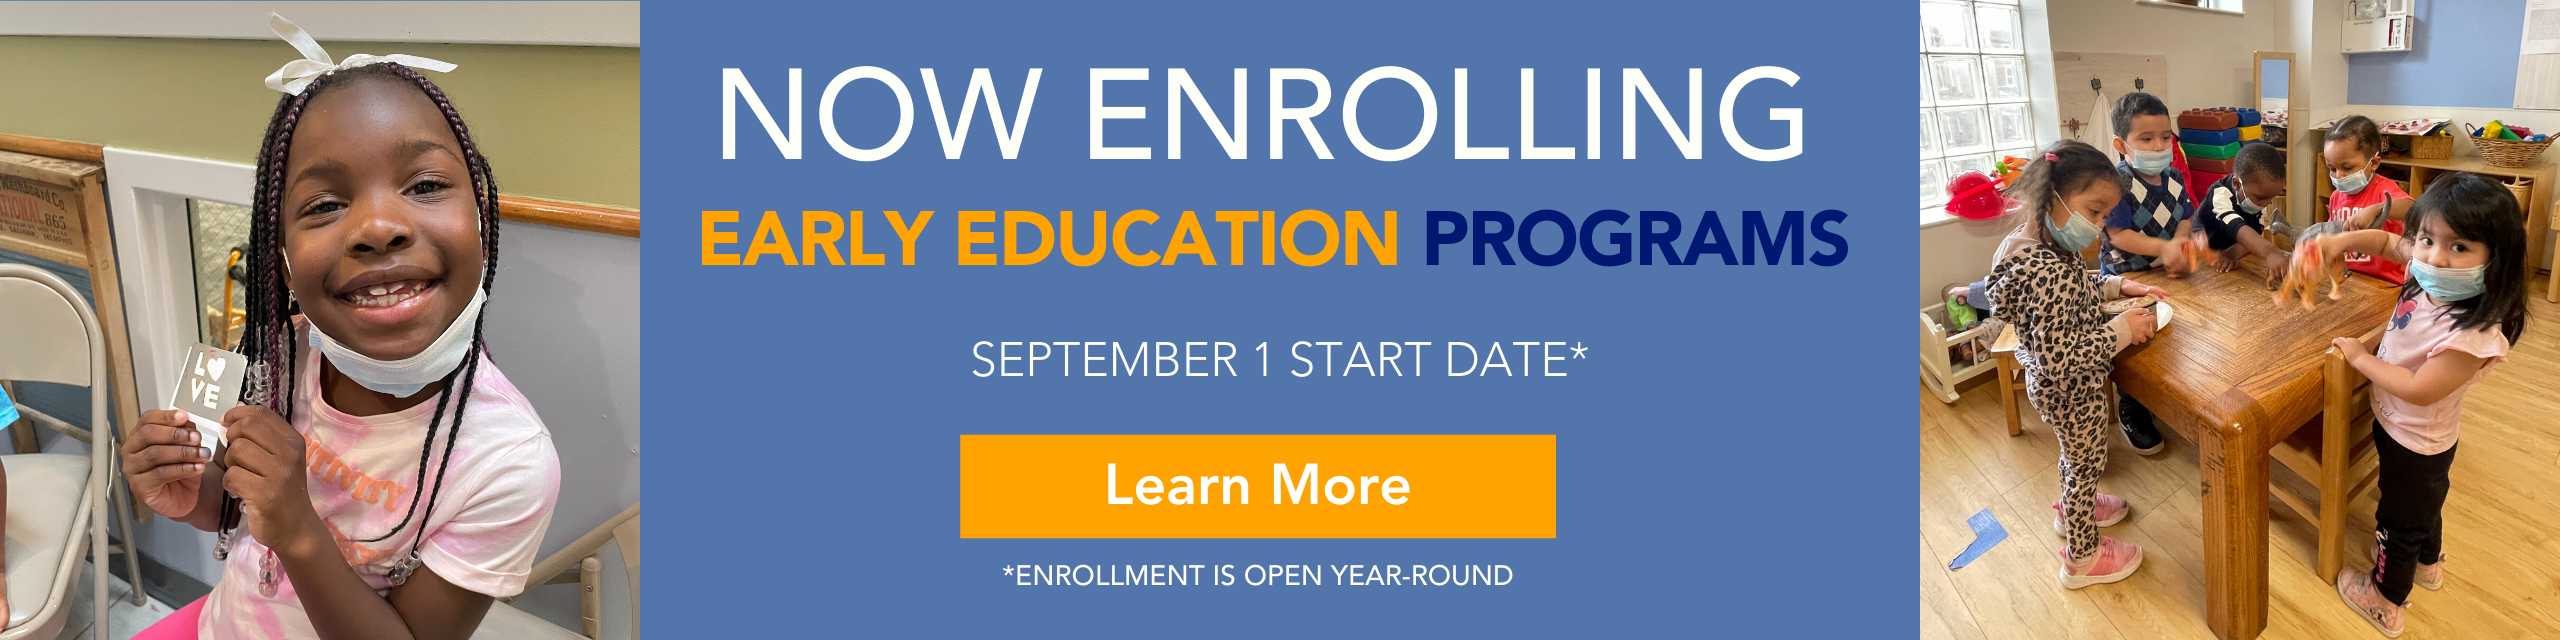 FY21 Now Enrolling: Early Education Programs